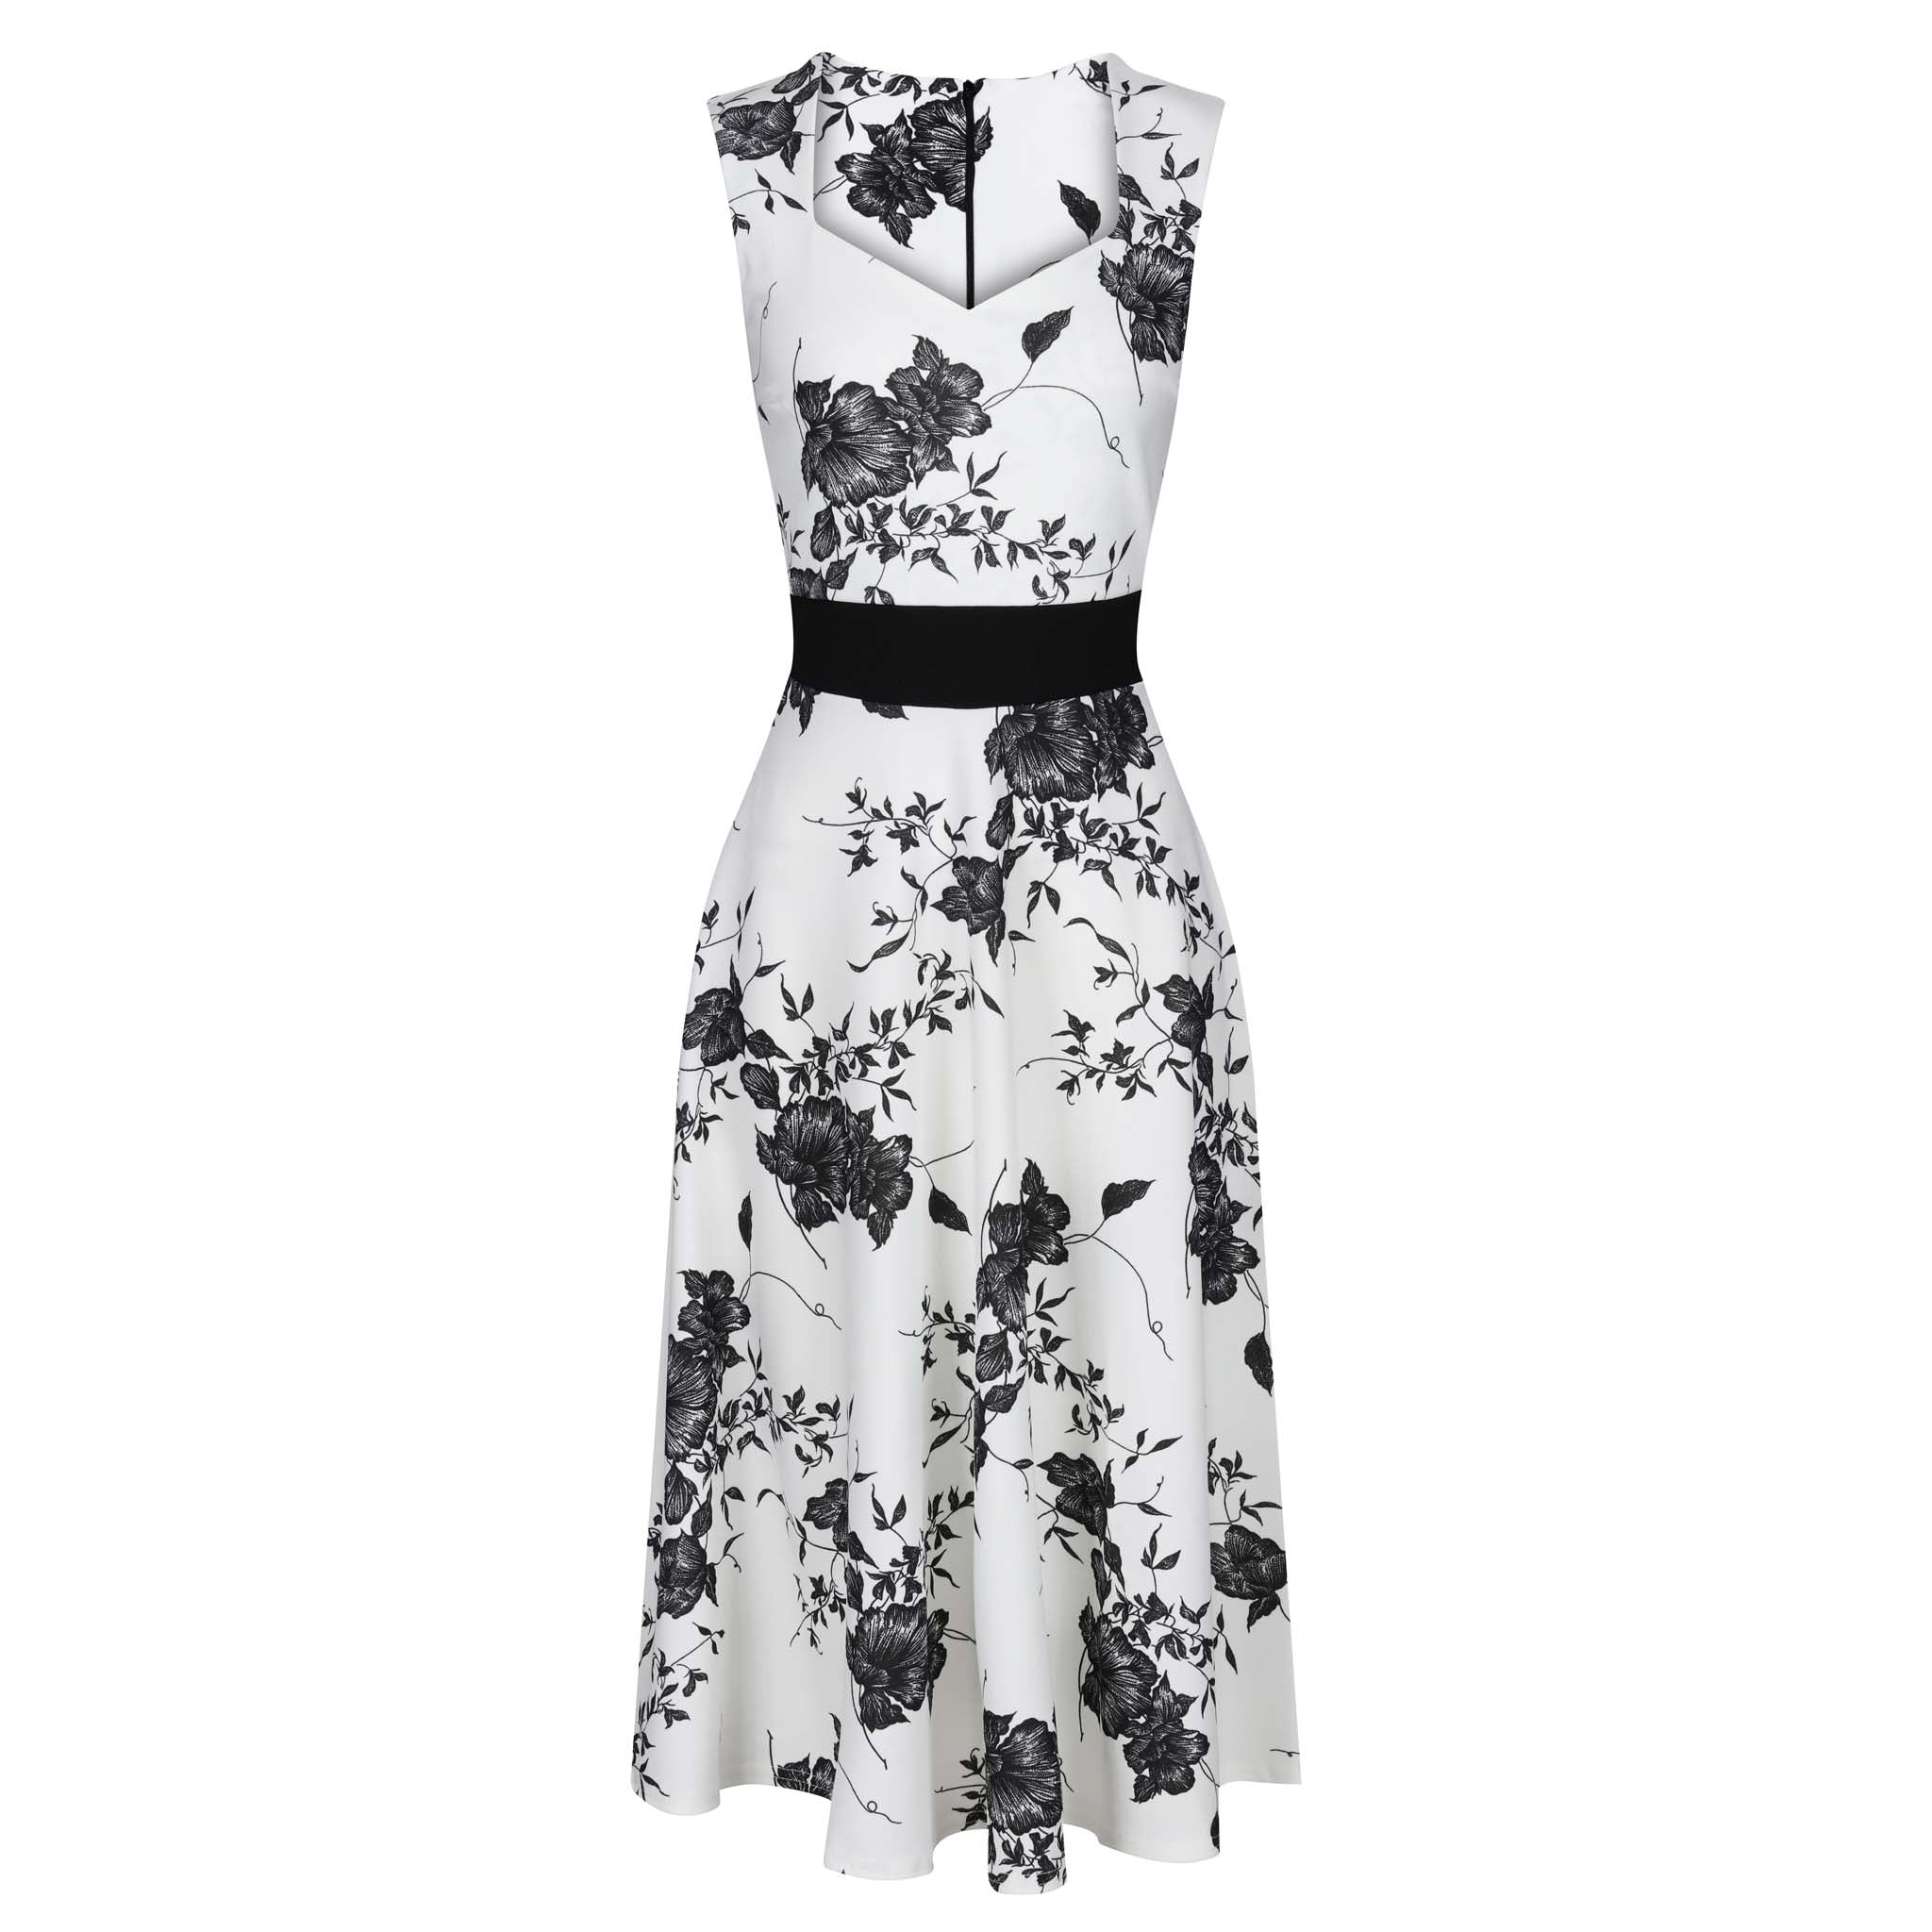 White And Black Floral Print Fit And Flare Swing Dress